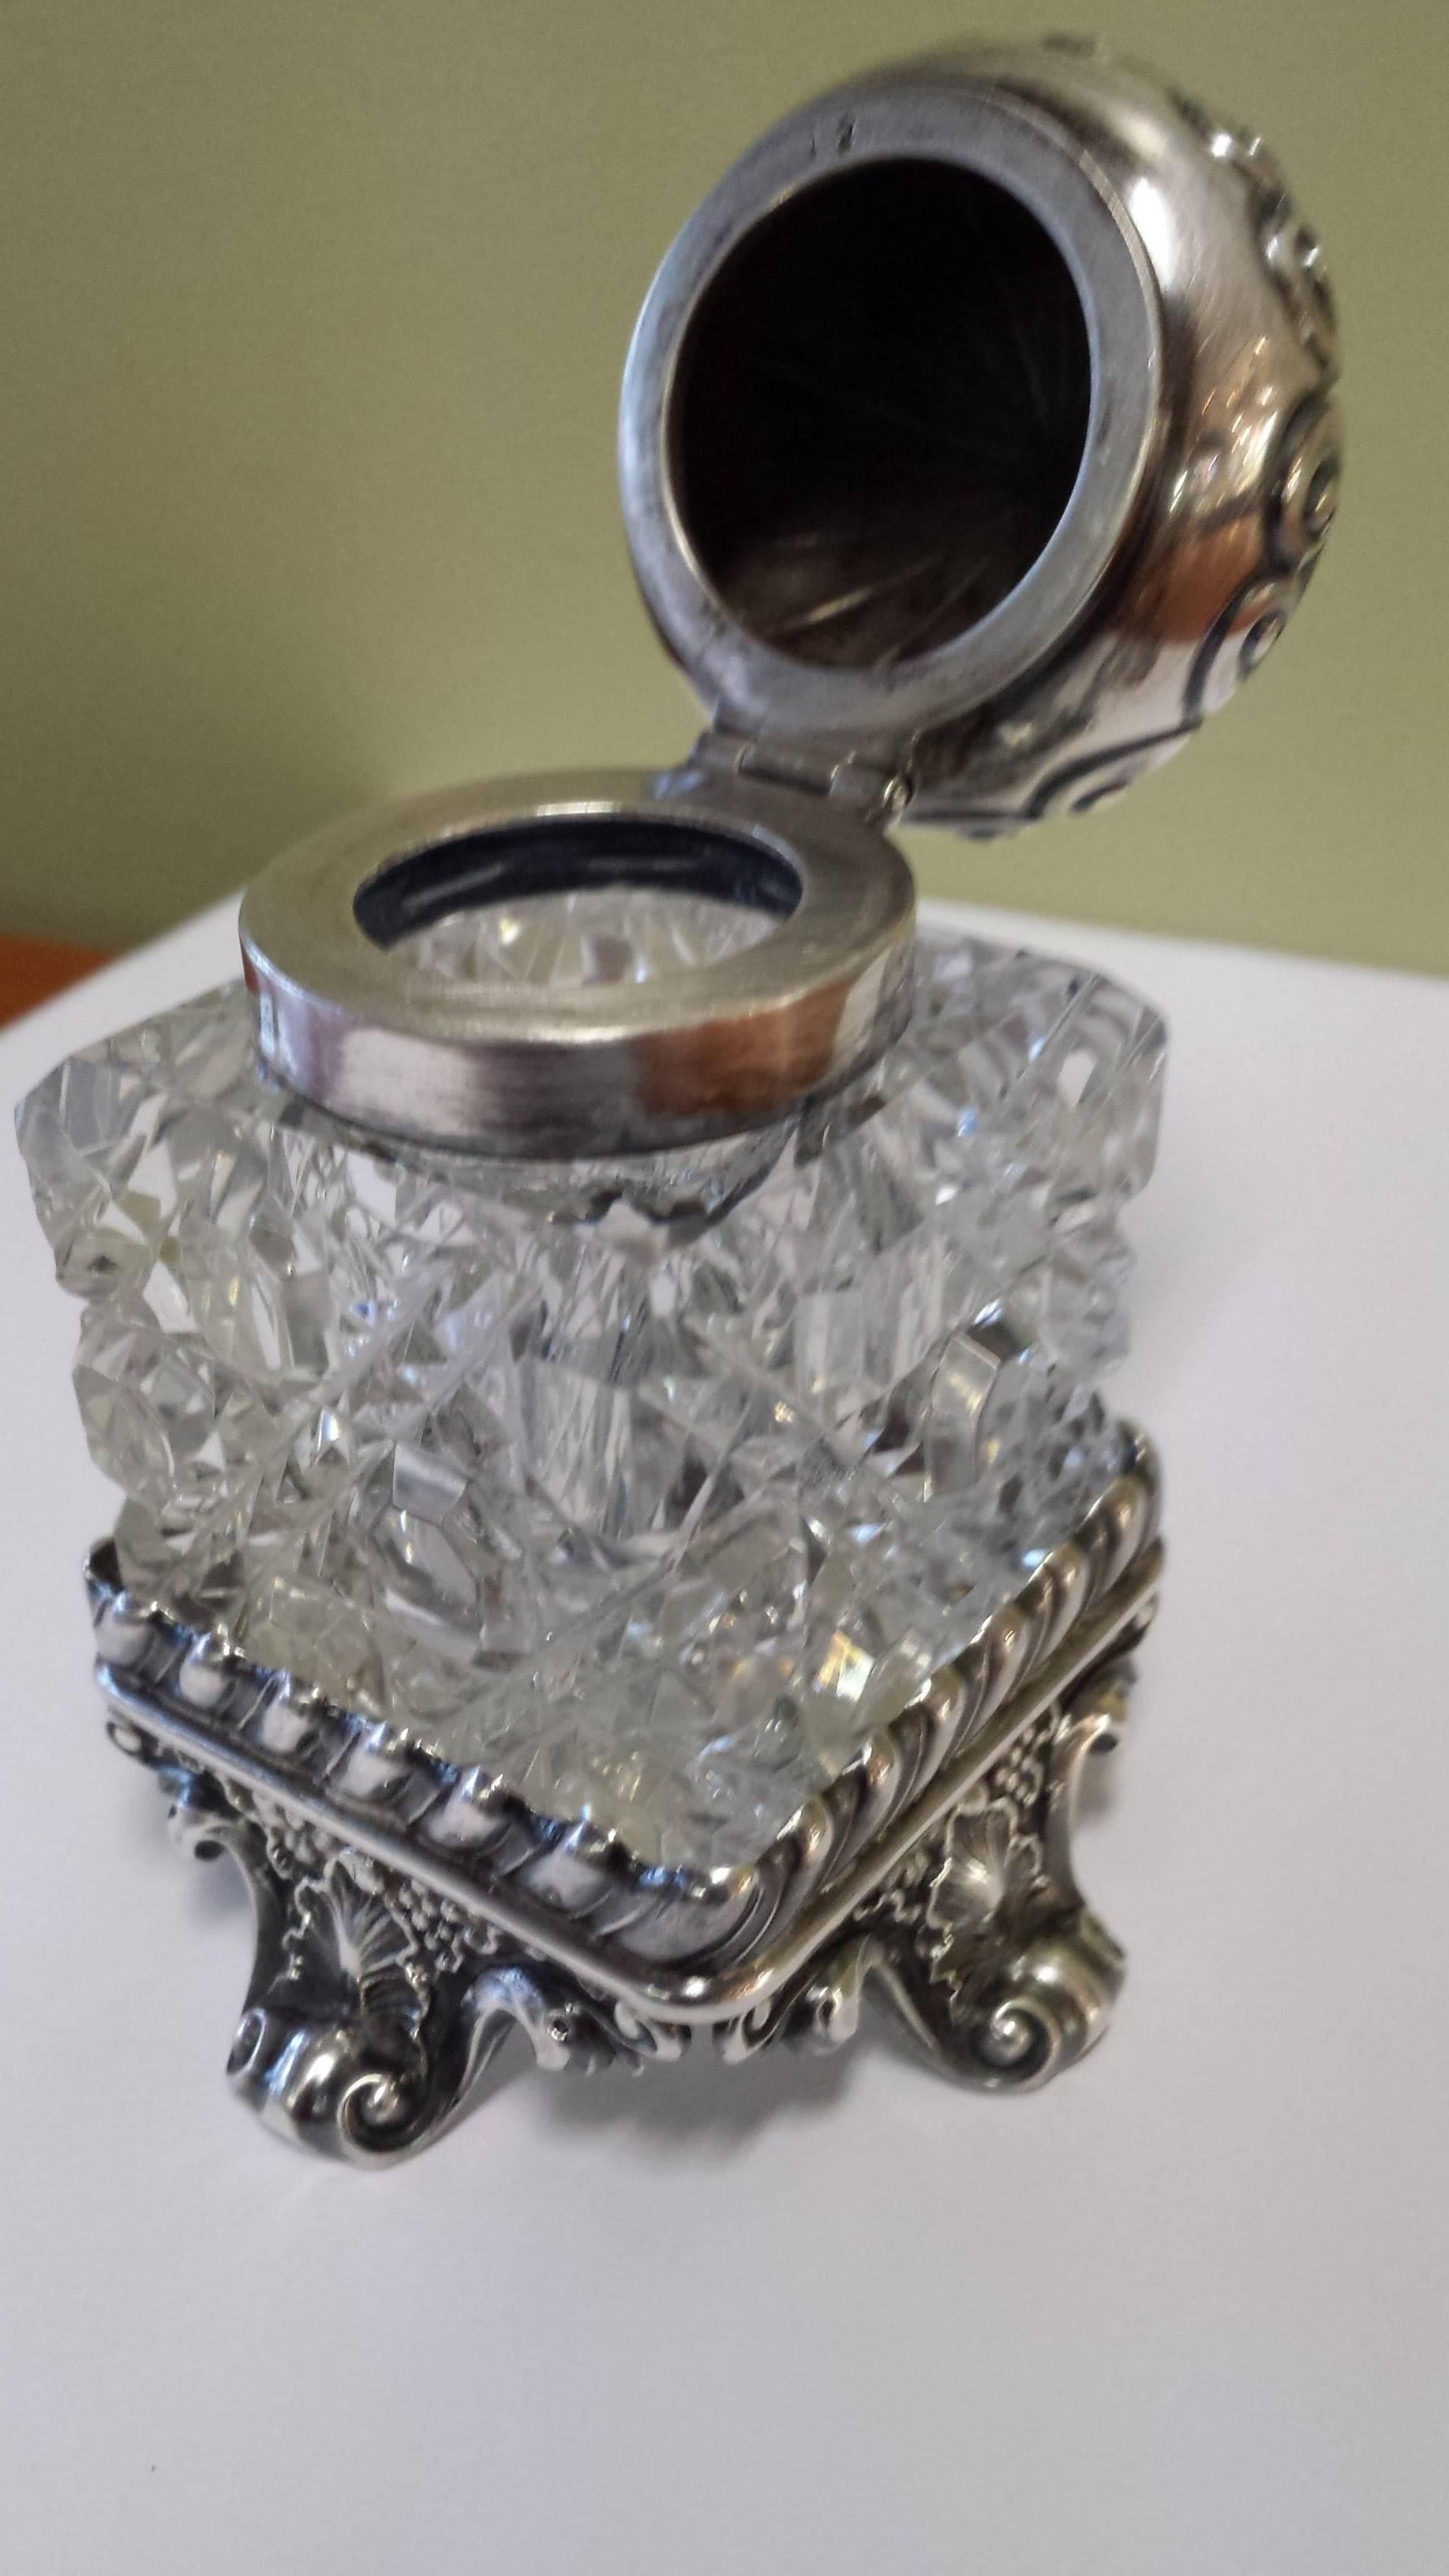 Sterling Silver & Cut Crystal Inkwell With A Seperate Sterling Base. The inkwell has a flip top and a seperate sterling silver detachable base. The inkwell measures 3 3/8"-inches high x 2 1/4"-inches wide. The base is stamped sterling